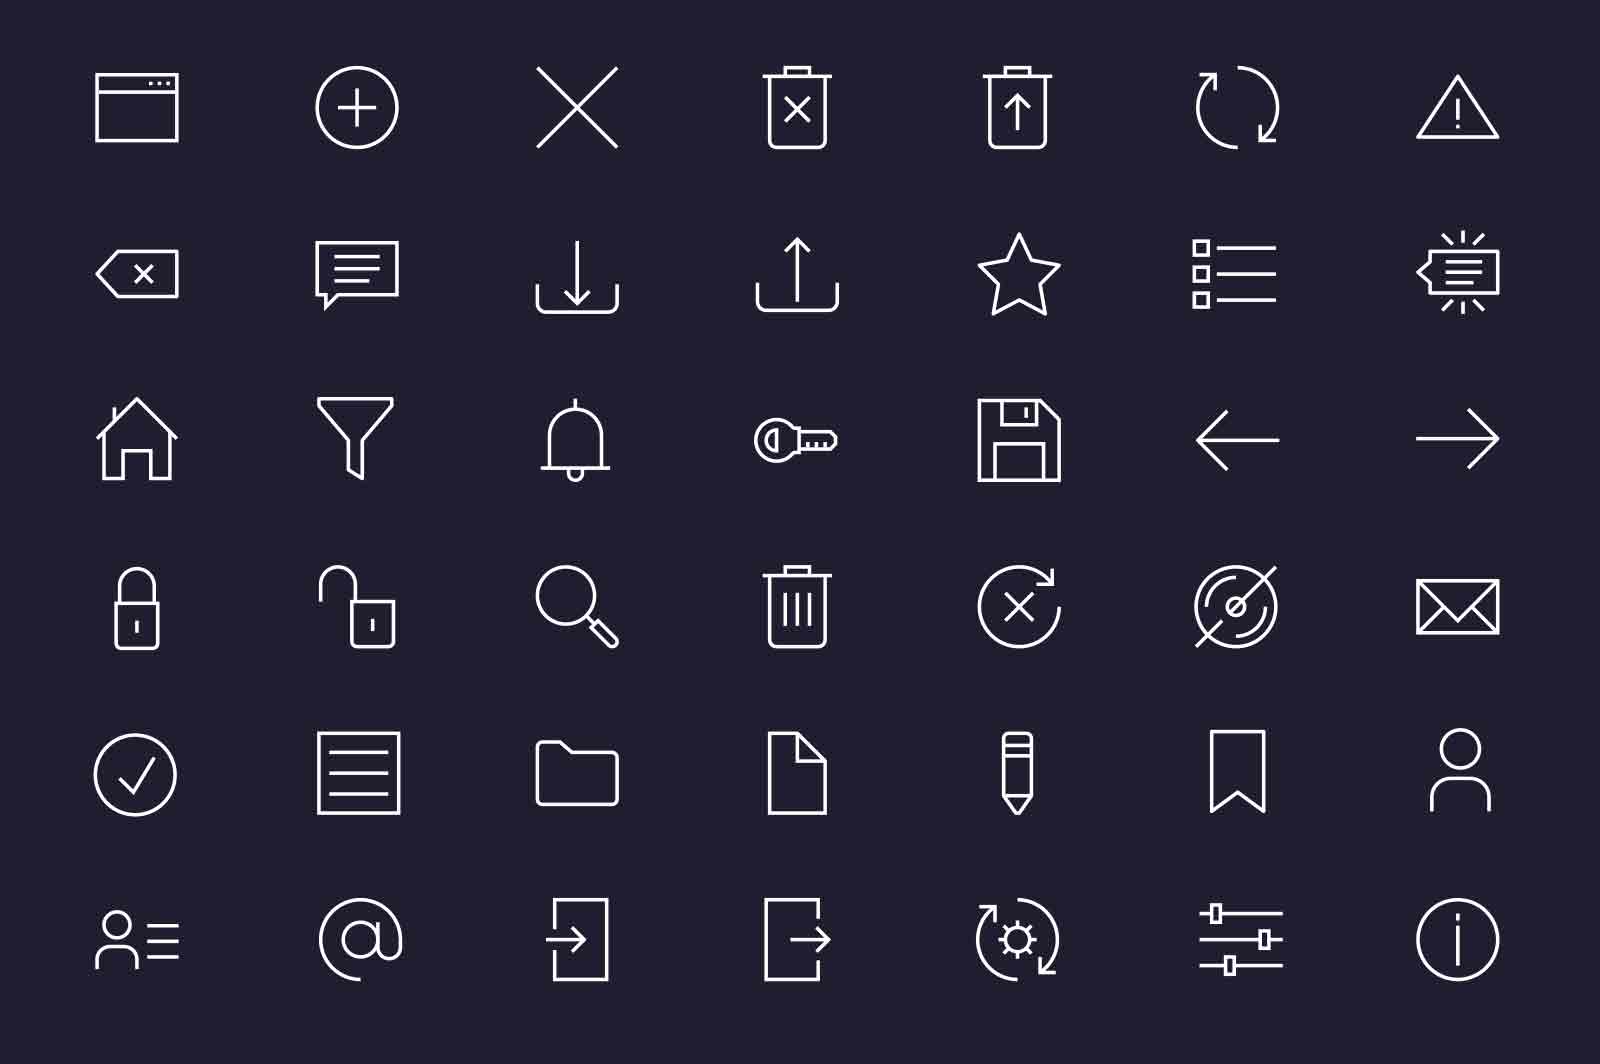 Website interface icons set vector illustration. Collection of signs for desktop line icon. Dark background